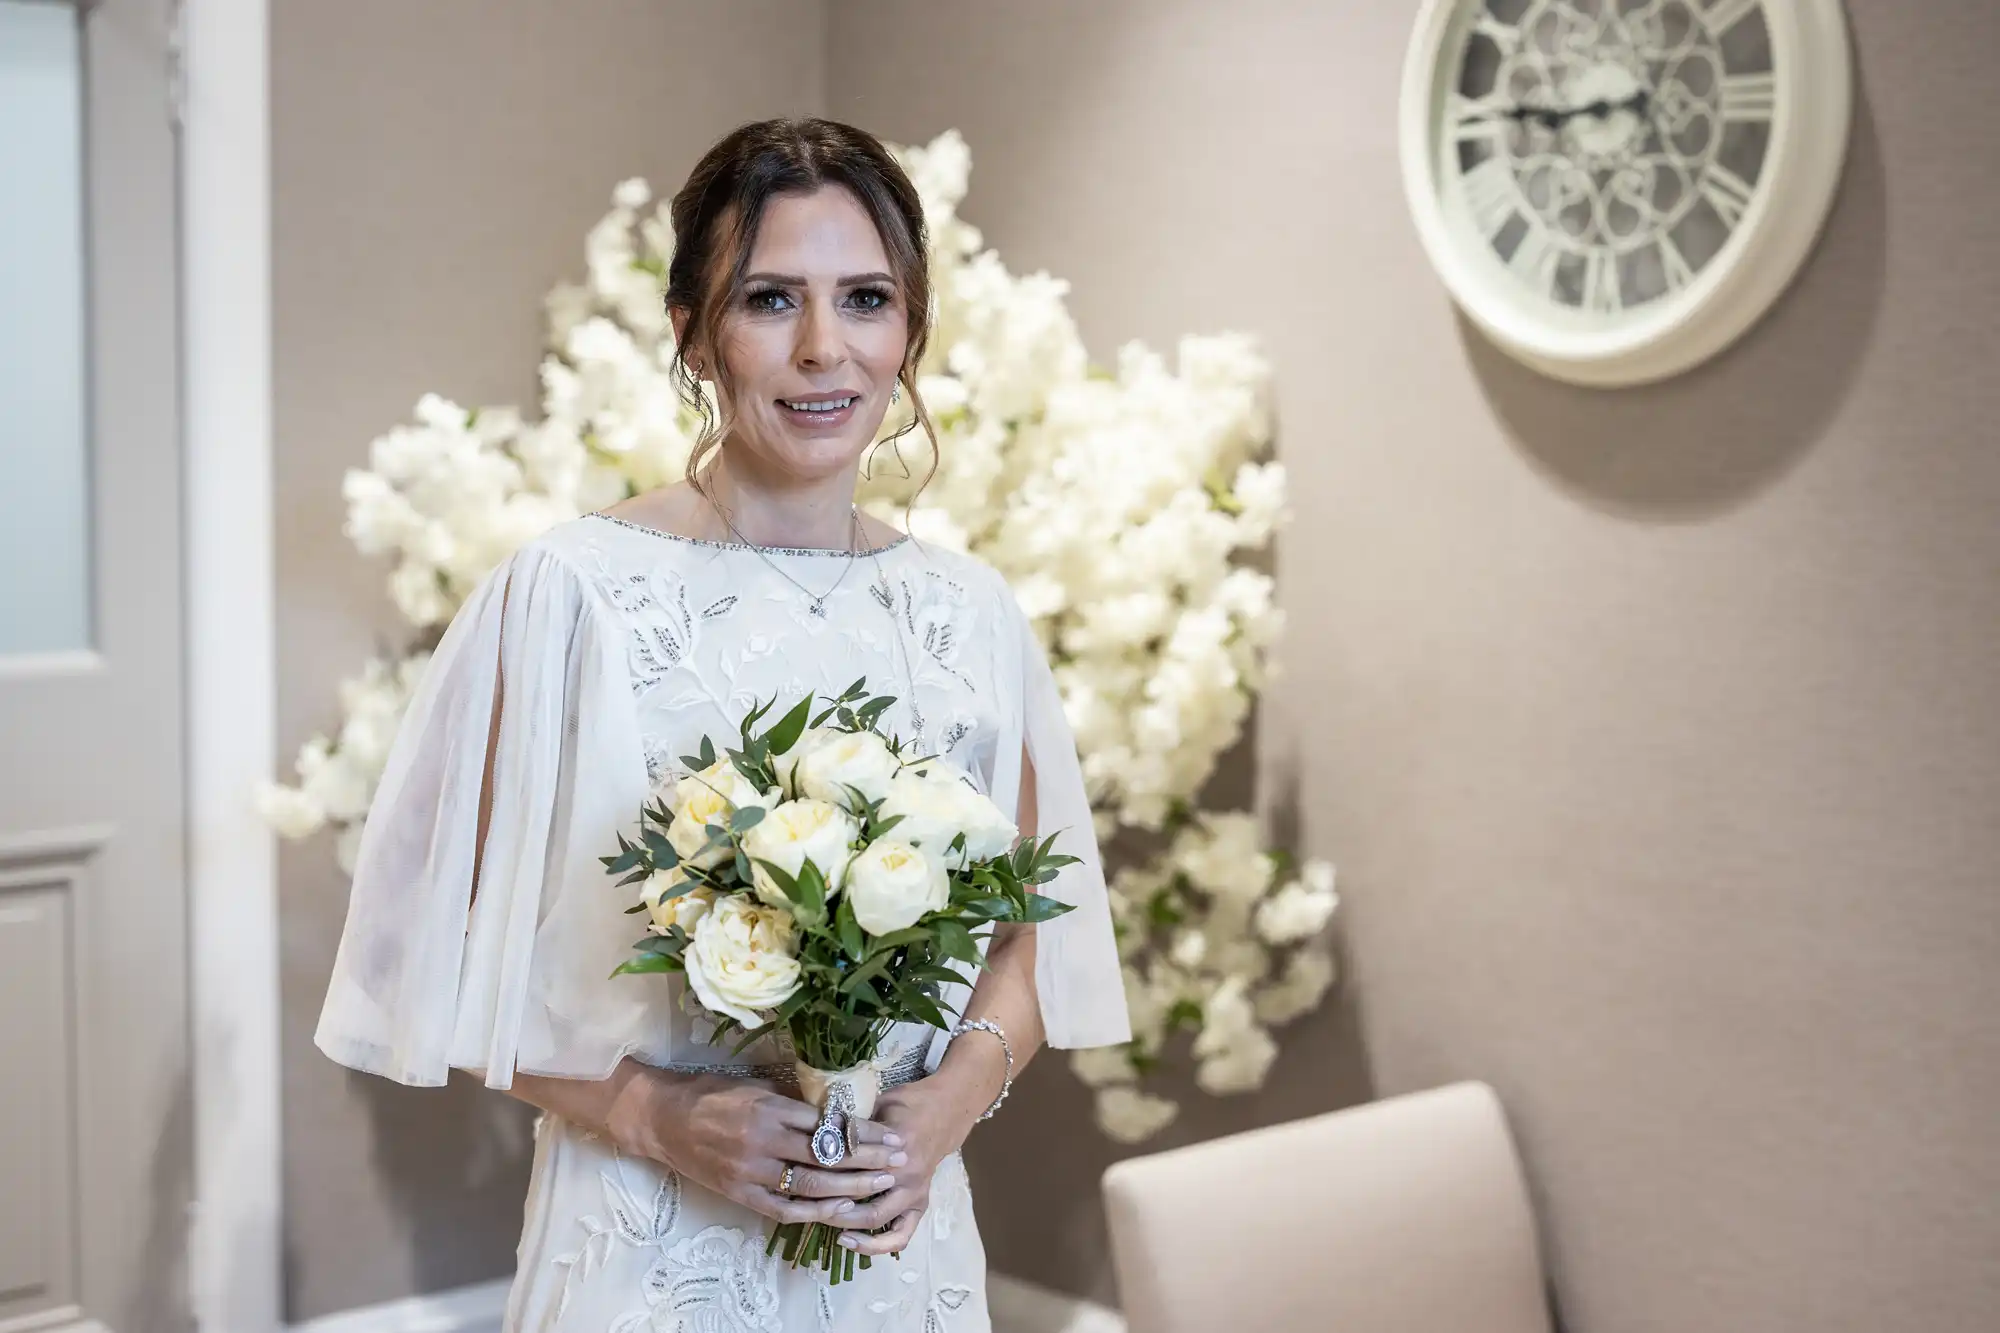 A woman wearing a white dress holds a bouquet of white flowers, standing indoors with a wall clock and white floral decorations in the background.